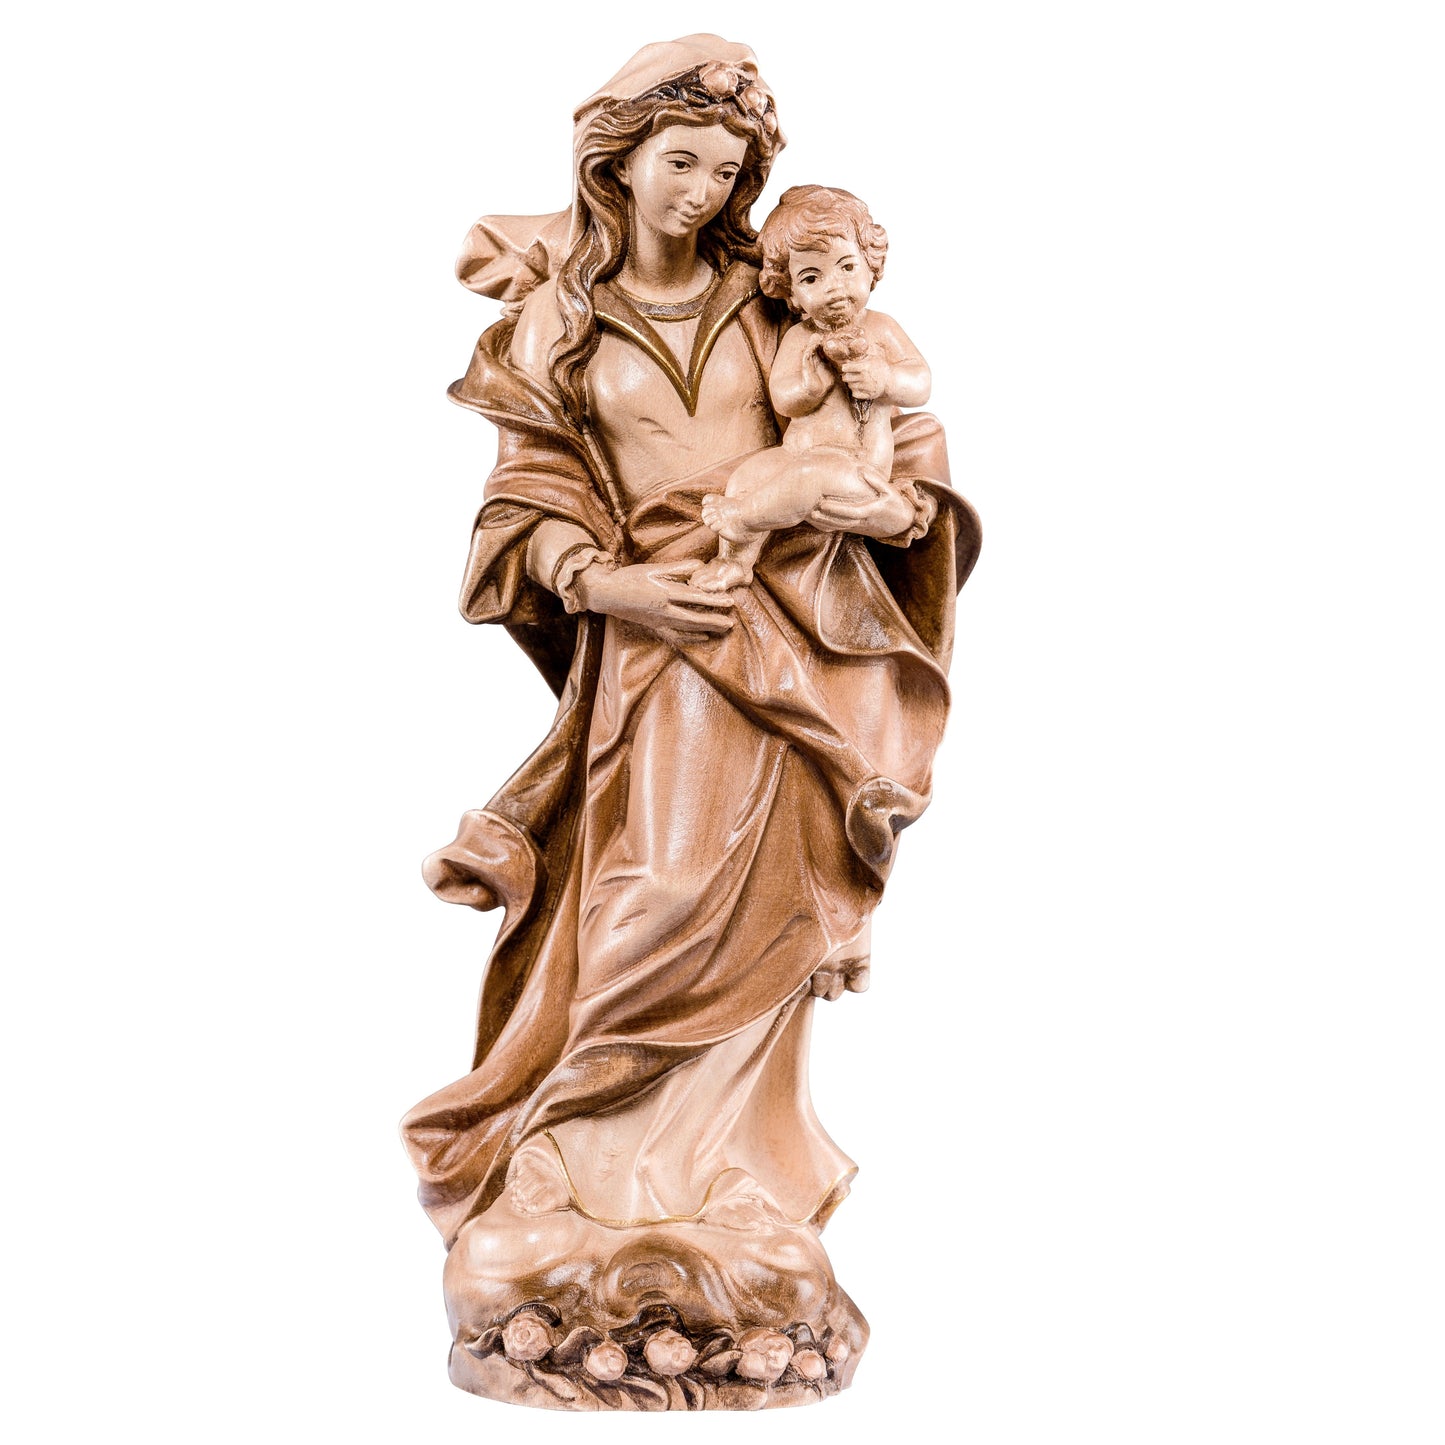 MONDO CATTOLICO Glossy / 15 cm (5.9 in) Wooden statue of Madonna of roses